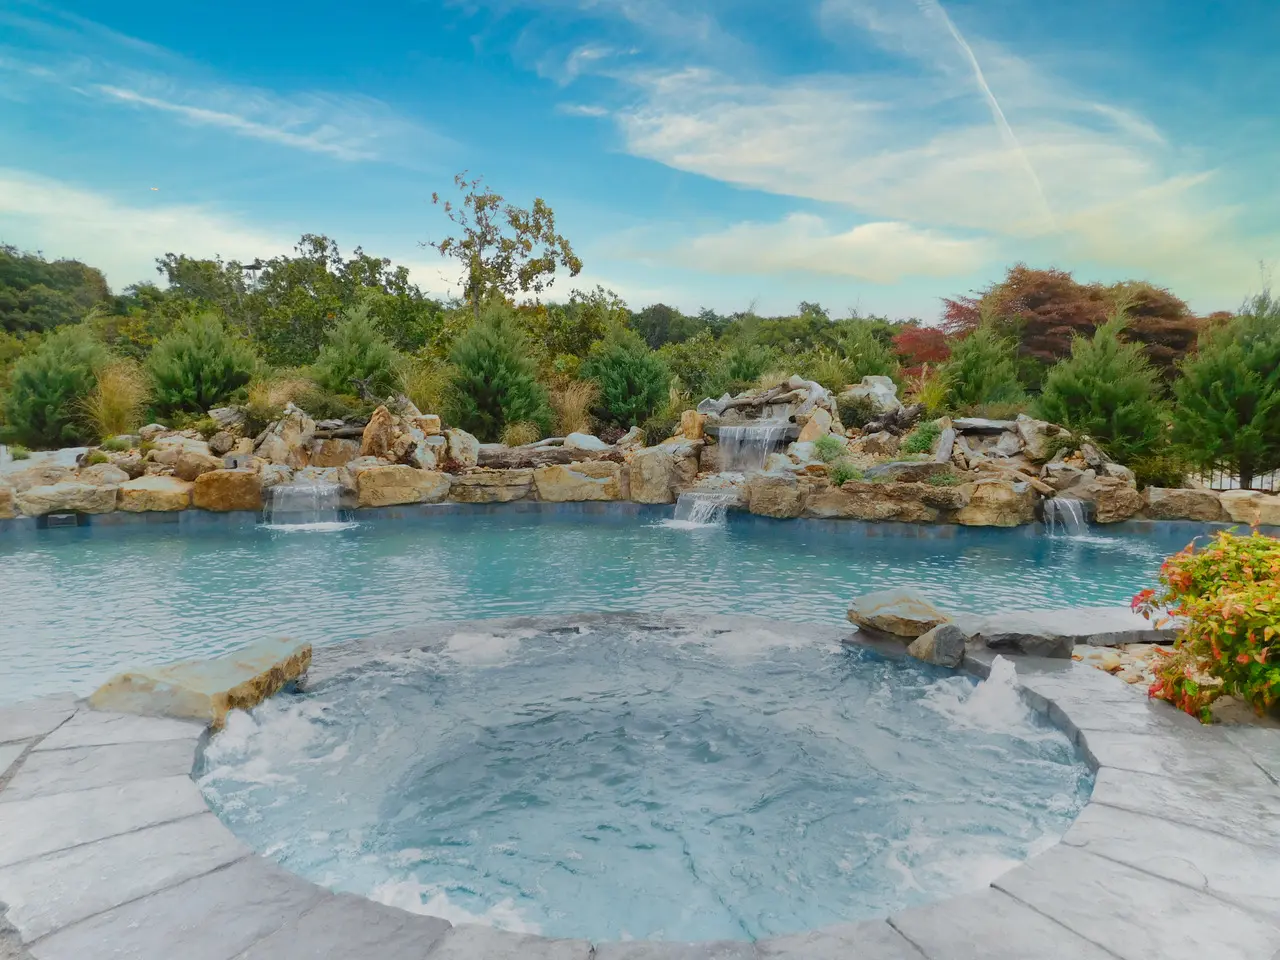 A pool with water flowing around it and trees in the background.